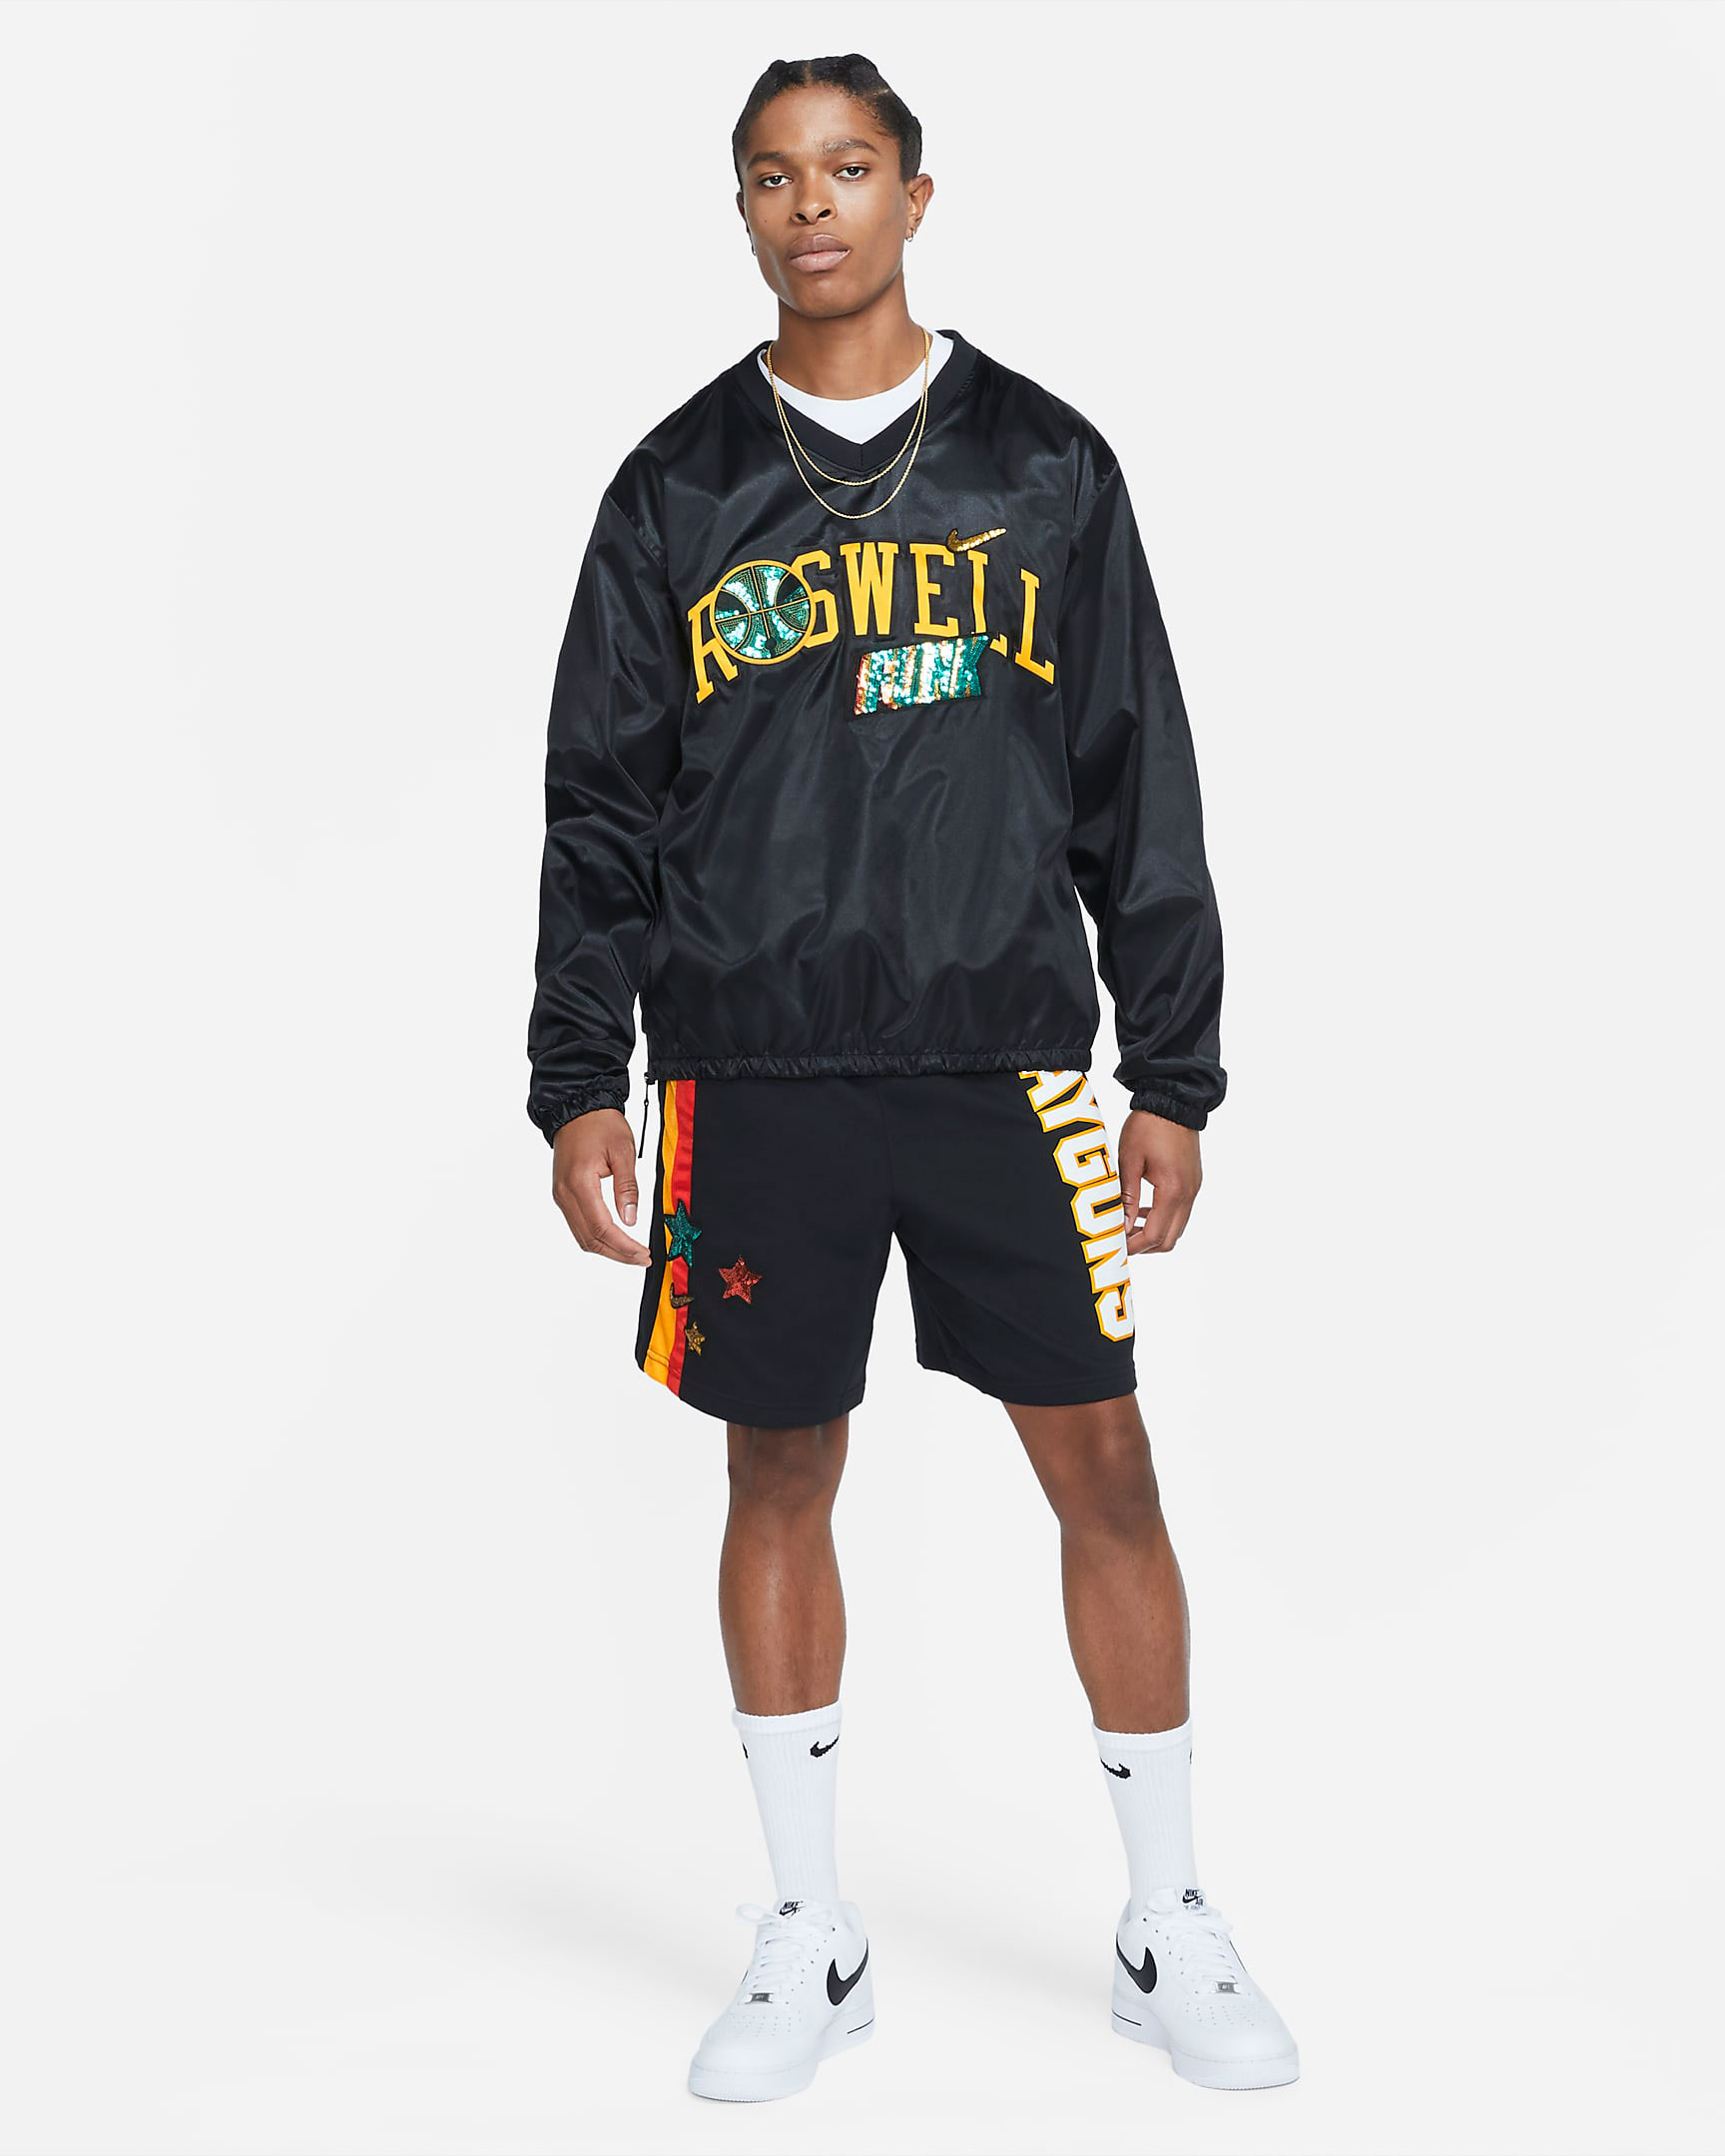 nike-roswell-rayguns-shirt-shorts-outfit